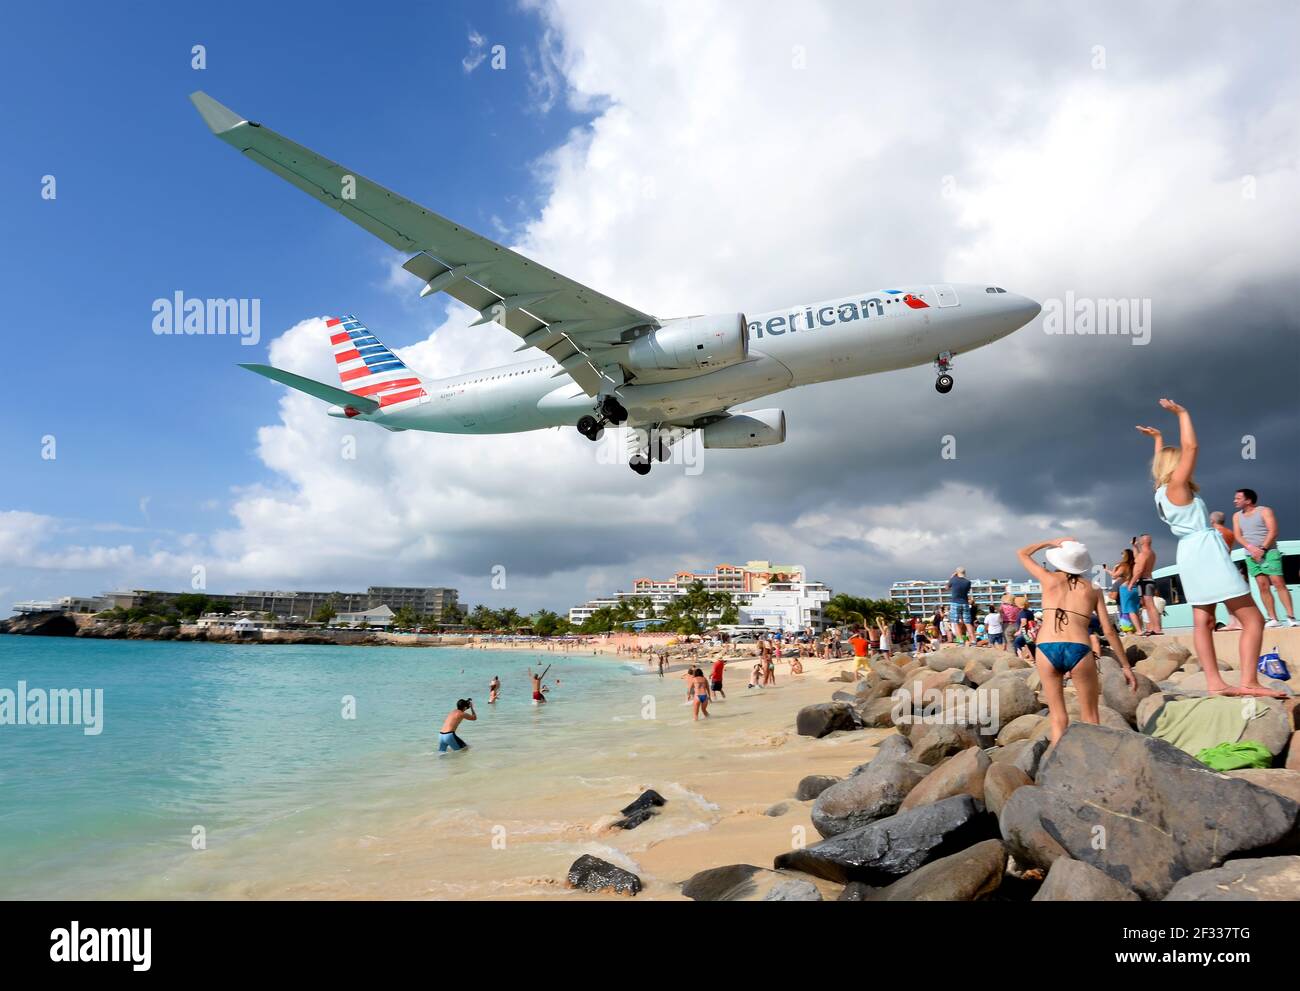 American Airlines Airbus A330 aircraft over Maho Beach in Saint Maarten Dutch Antilles. Airport beach in St. Maarten famous for airplanes passing over. Stock Photo